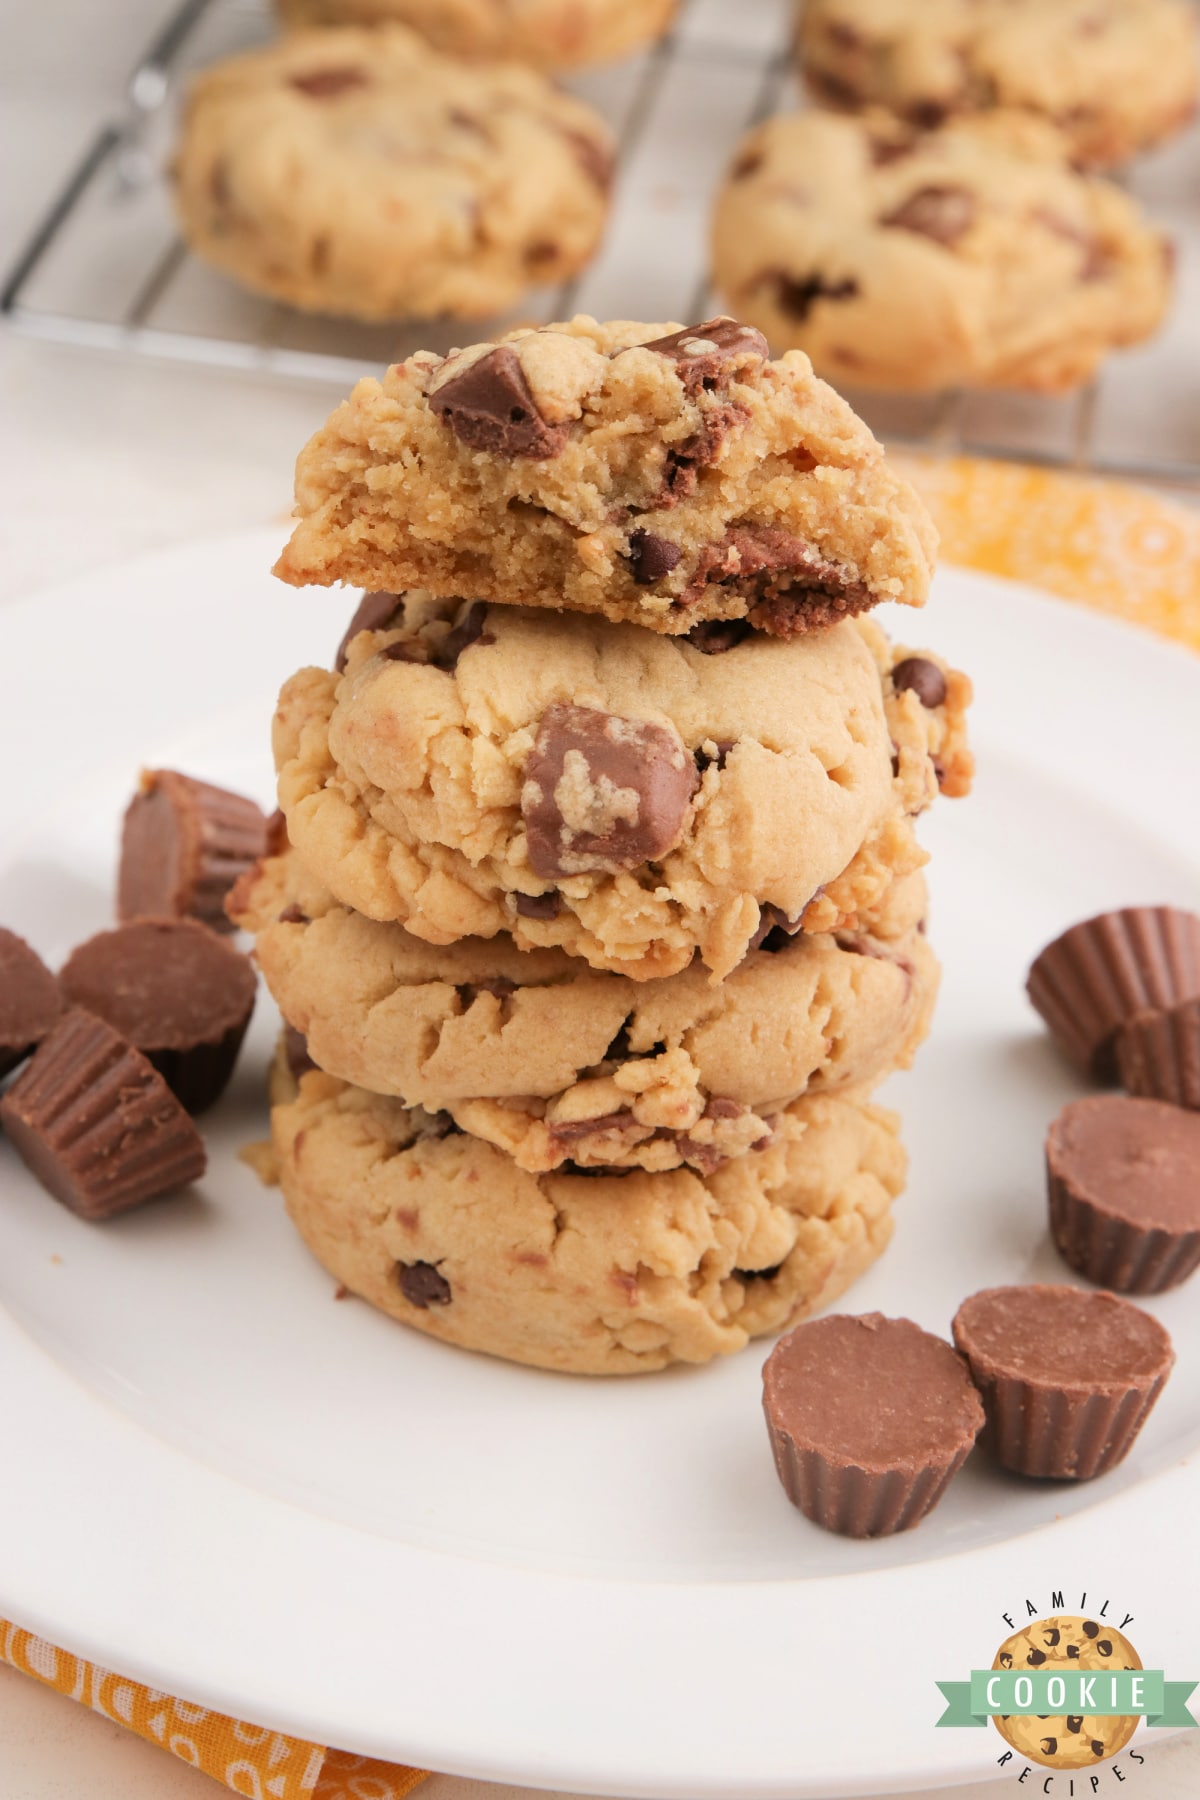 Reese's Peanut Butter Banana Cookies made with Reese's peanut butter cups, chocolate chips, peanut butter and banana pudding mix. Best flavor combination all together in one delicious cookie recipe!